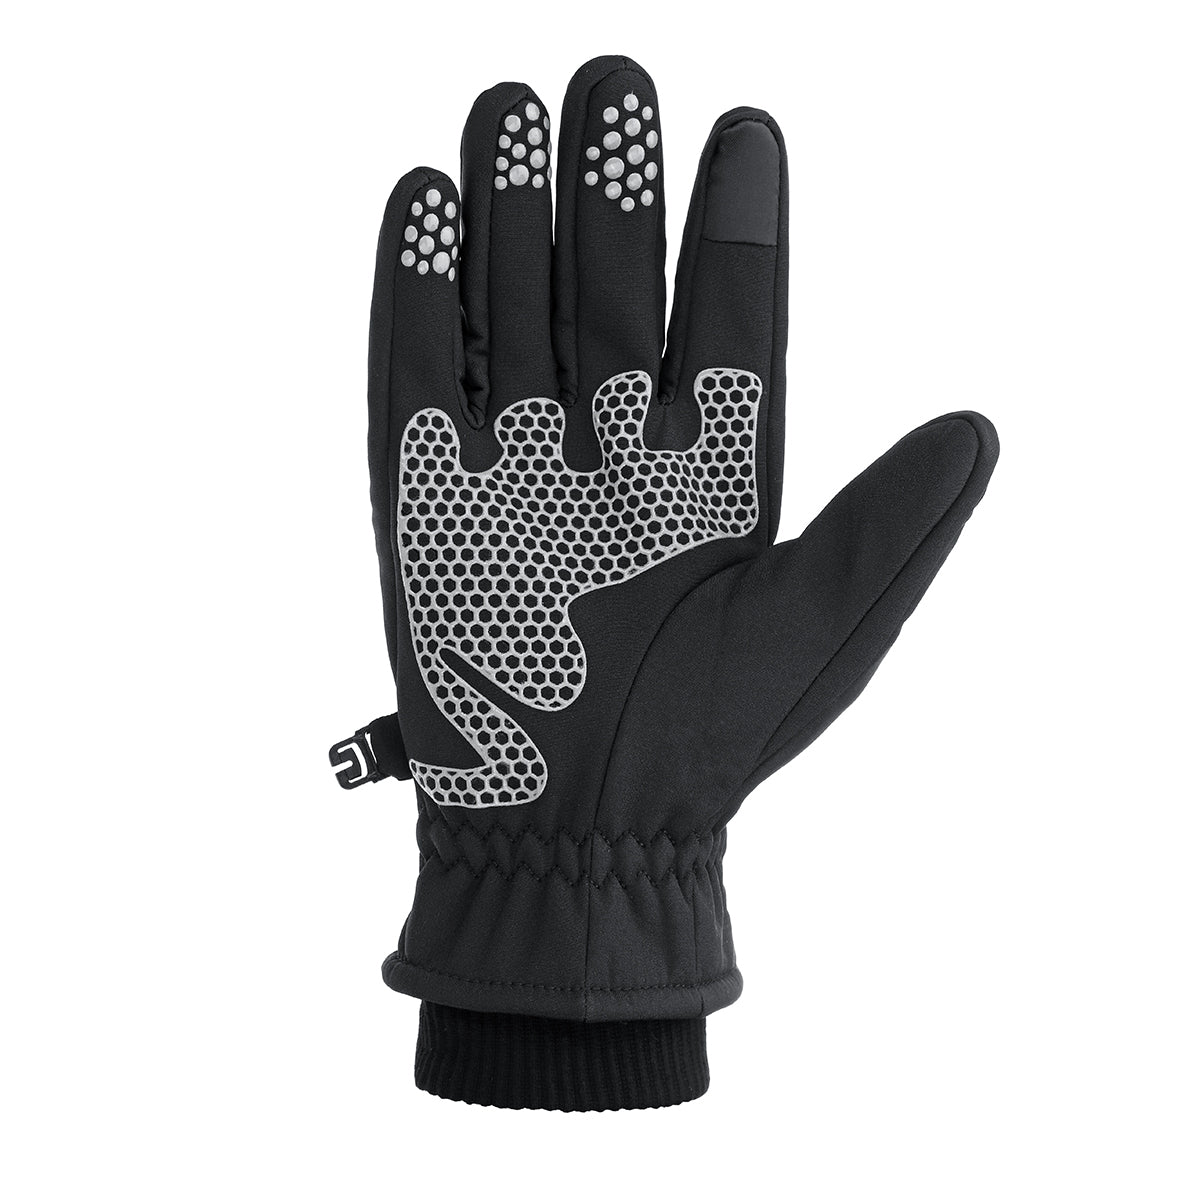 Dark Slate Gray Winter Warm Touch Screen Thermal Gloves Motorcycle Ski Snow Snowboard Cycling Touchscreen Waterproof